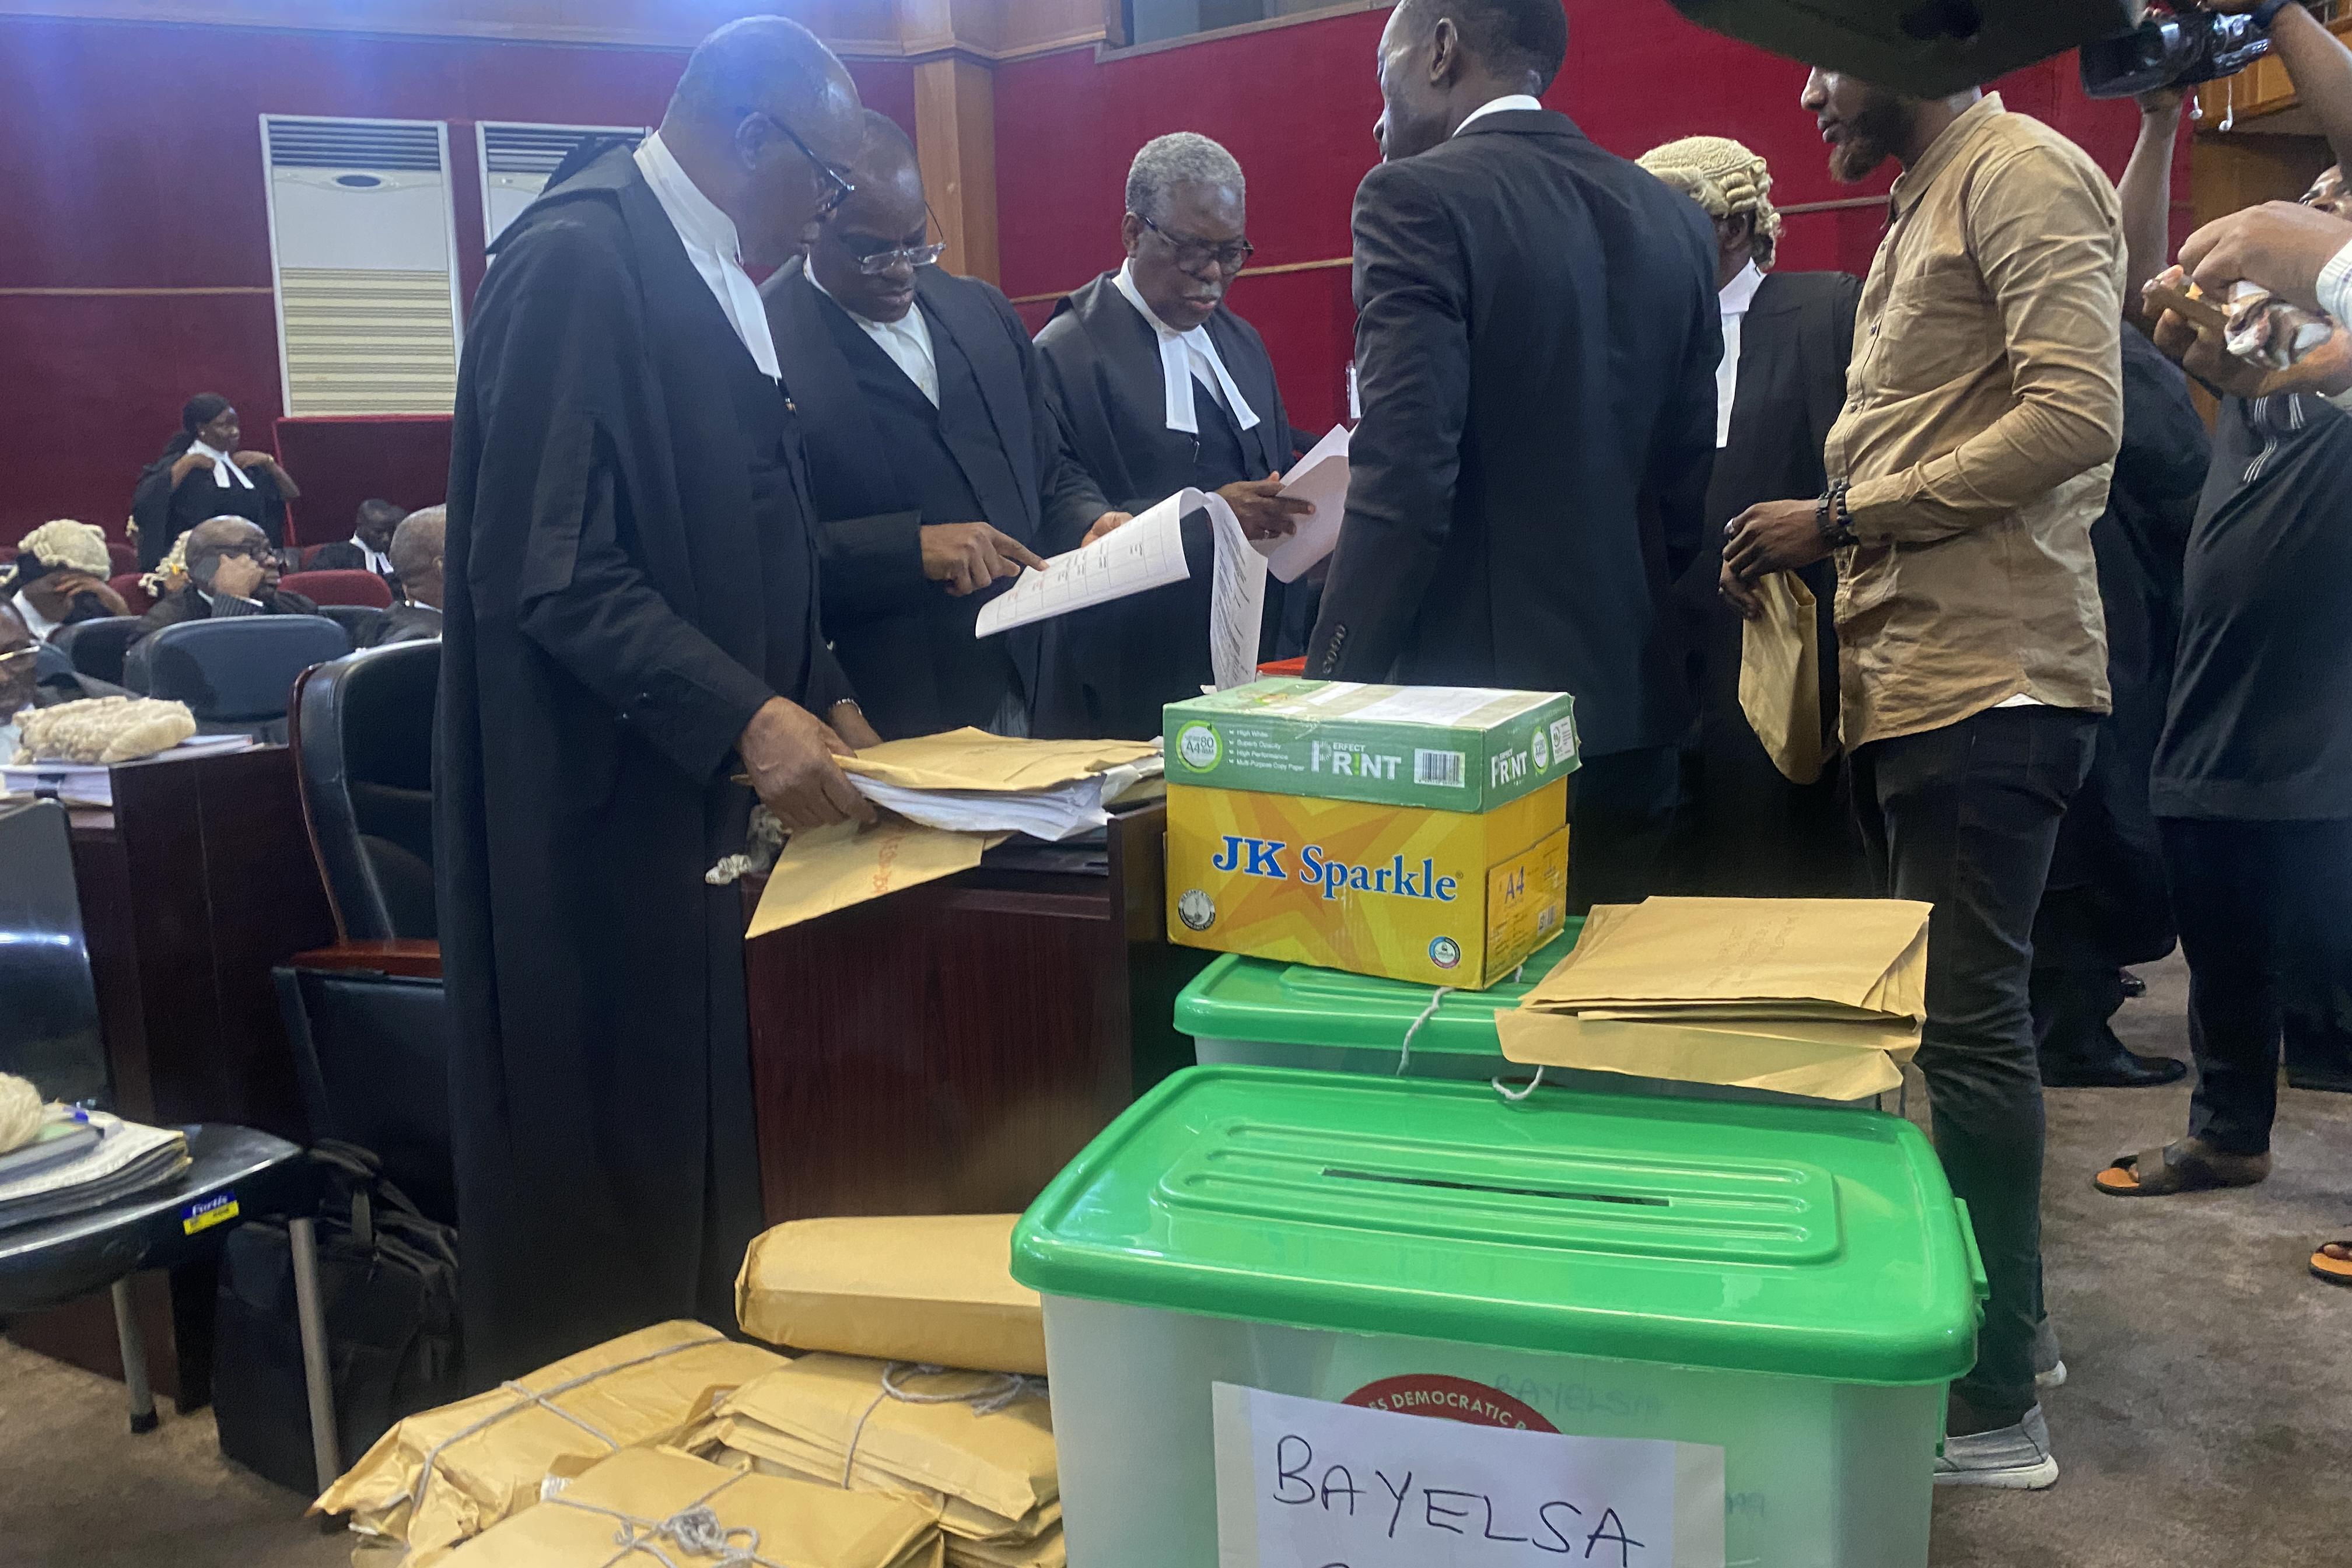 PDP counsels for court wit plenti plastic boxes and big big envelopes wit di evidence